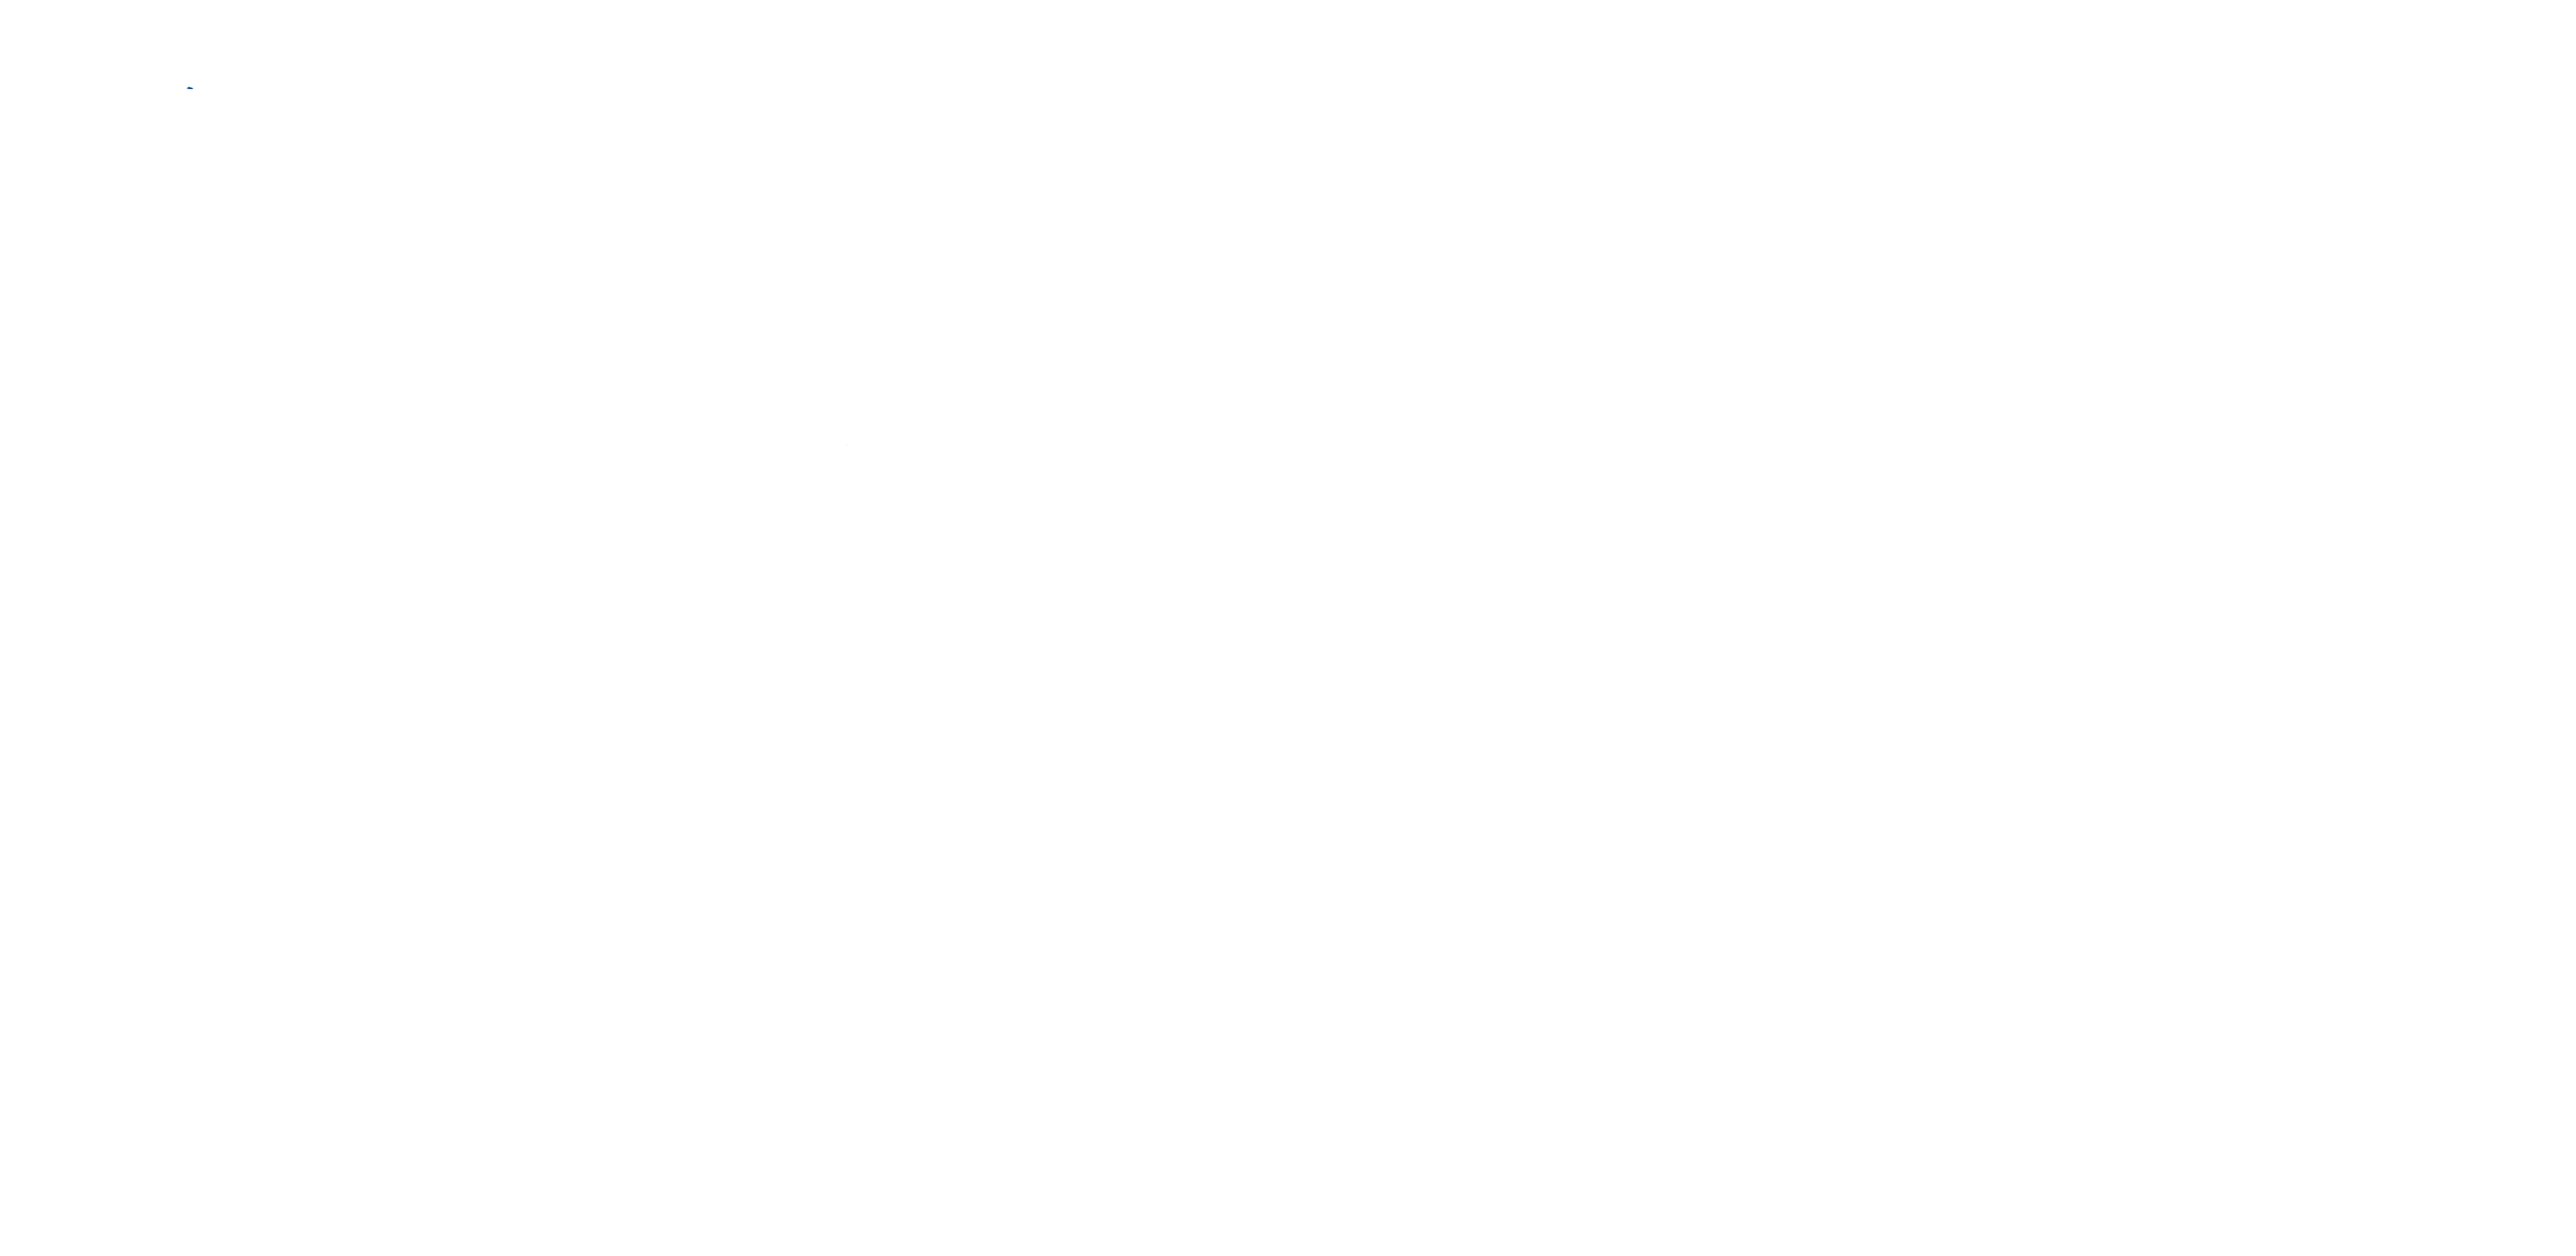 TLTC - Thierry Lambert Trading & Consulting